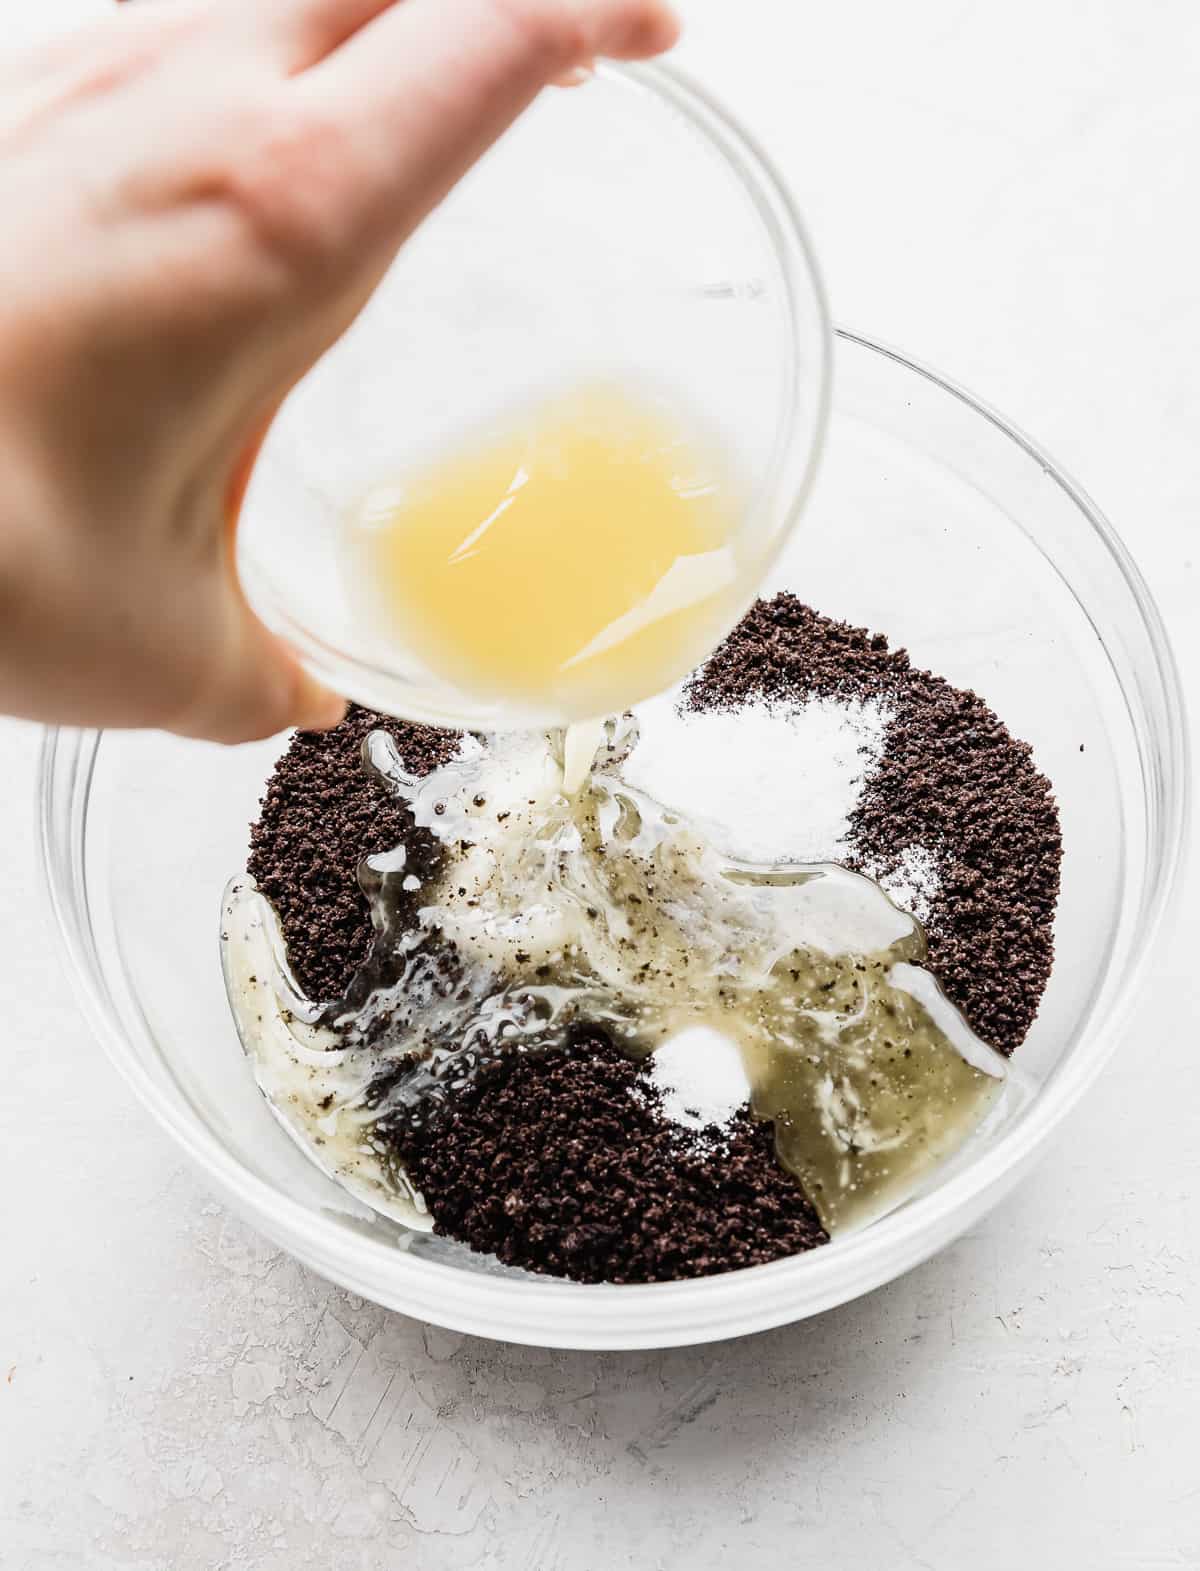 Melted butter being poured into a bowl full of crushed Oreo crumbs and sugar.